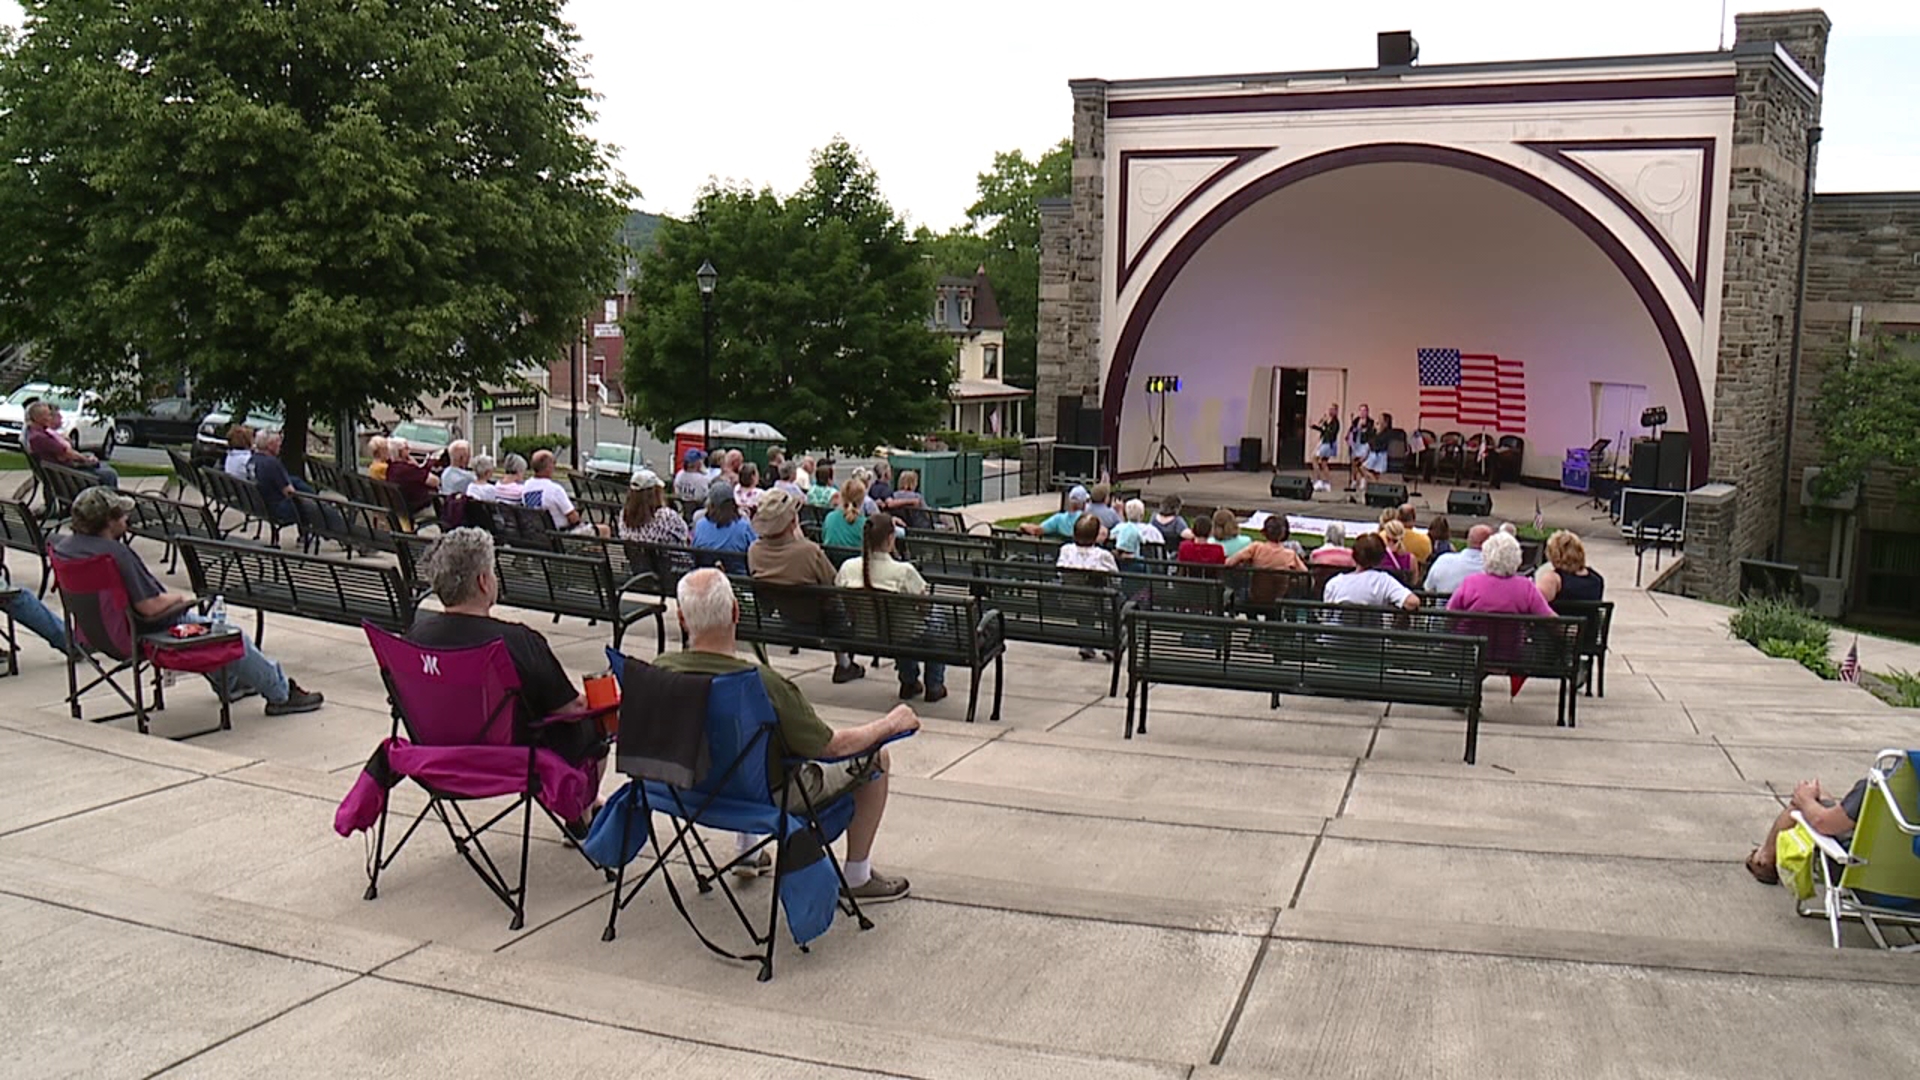 Saturday marked the start of the Music in the Park concert series at Lehighton Park's Amphitheater.